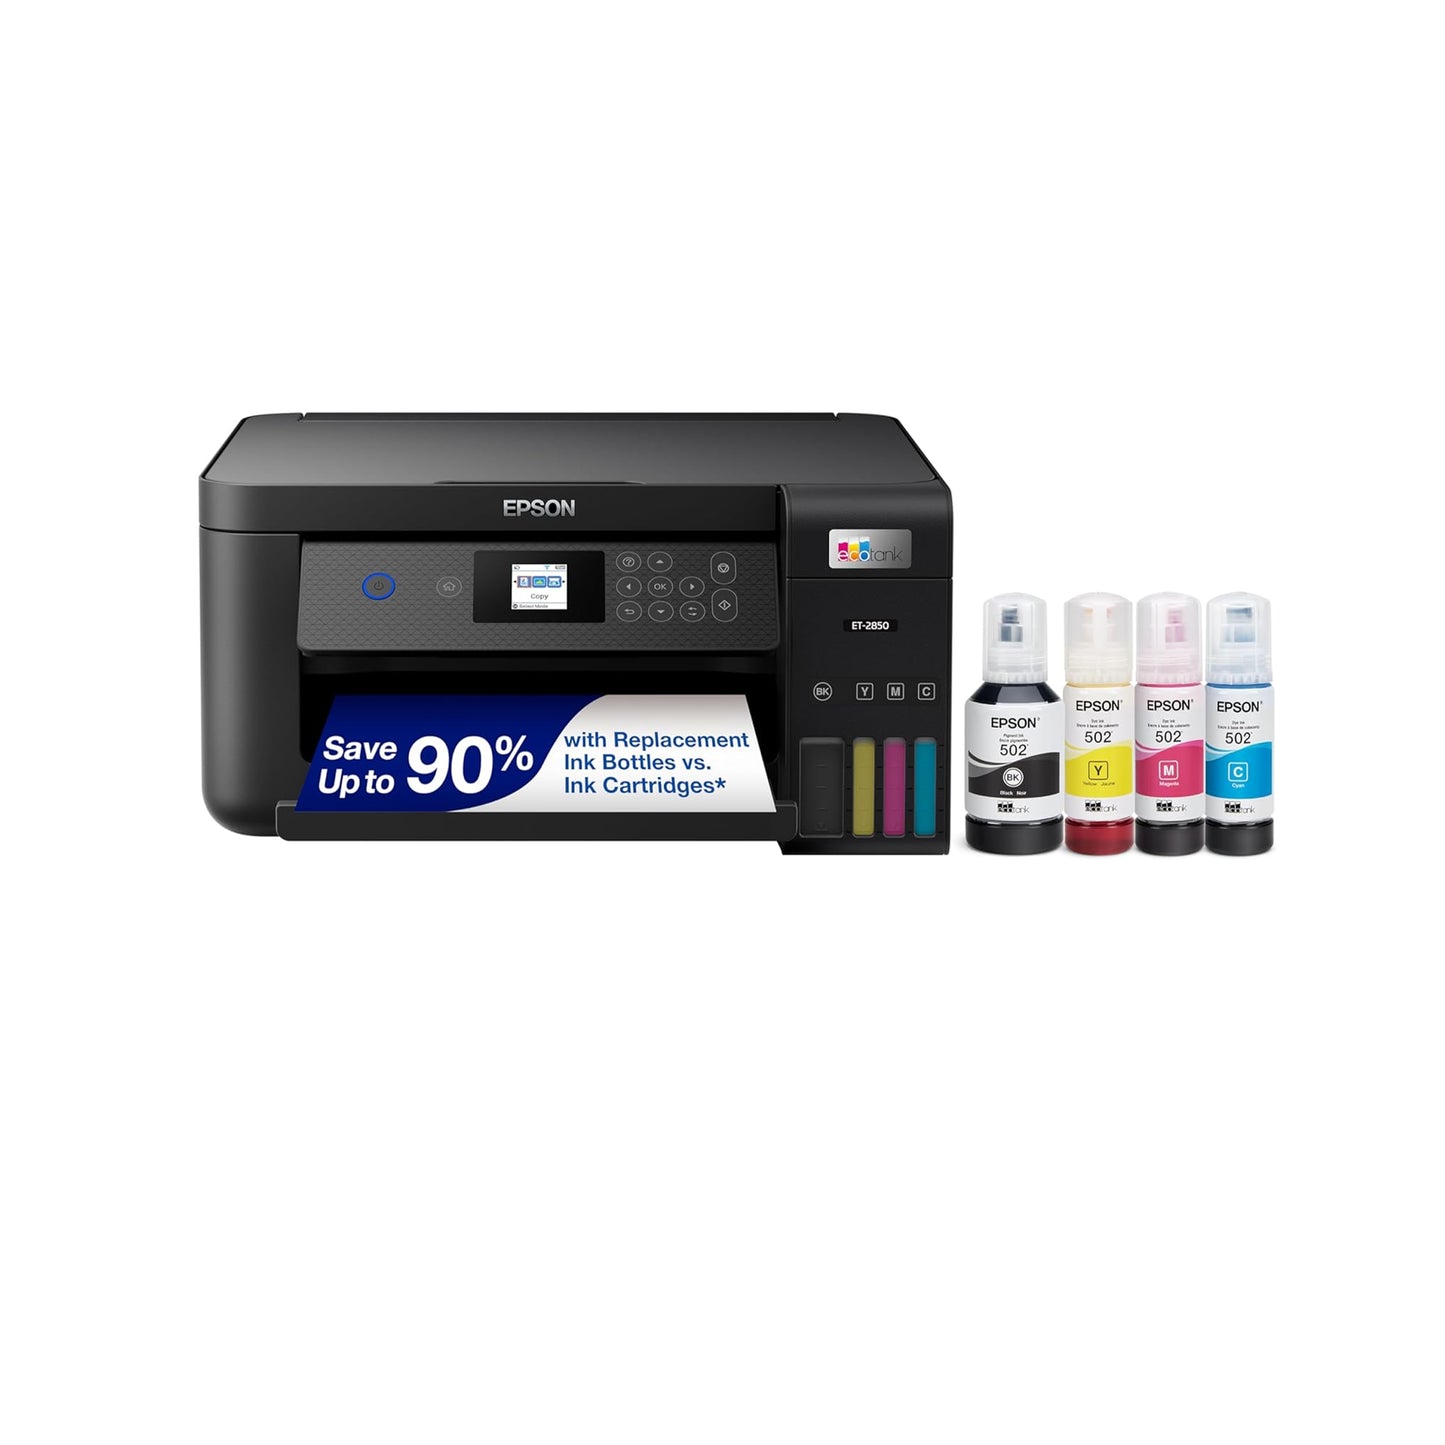 Epson EcoTank ET-2850 Wireless Color All-in-One Cartridge-Free Supertank Printer with Scan, Copy and Auto 2-Sided Printing - Black, Medium